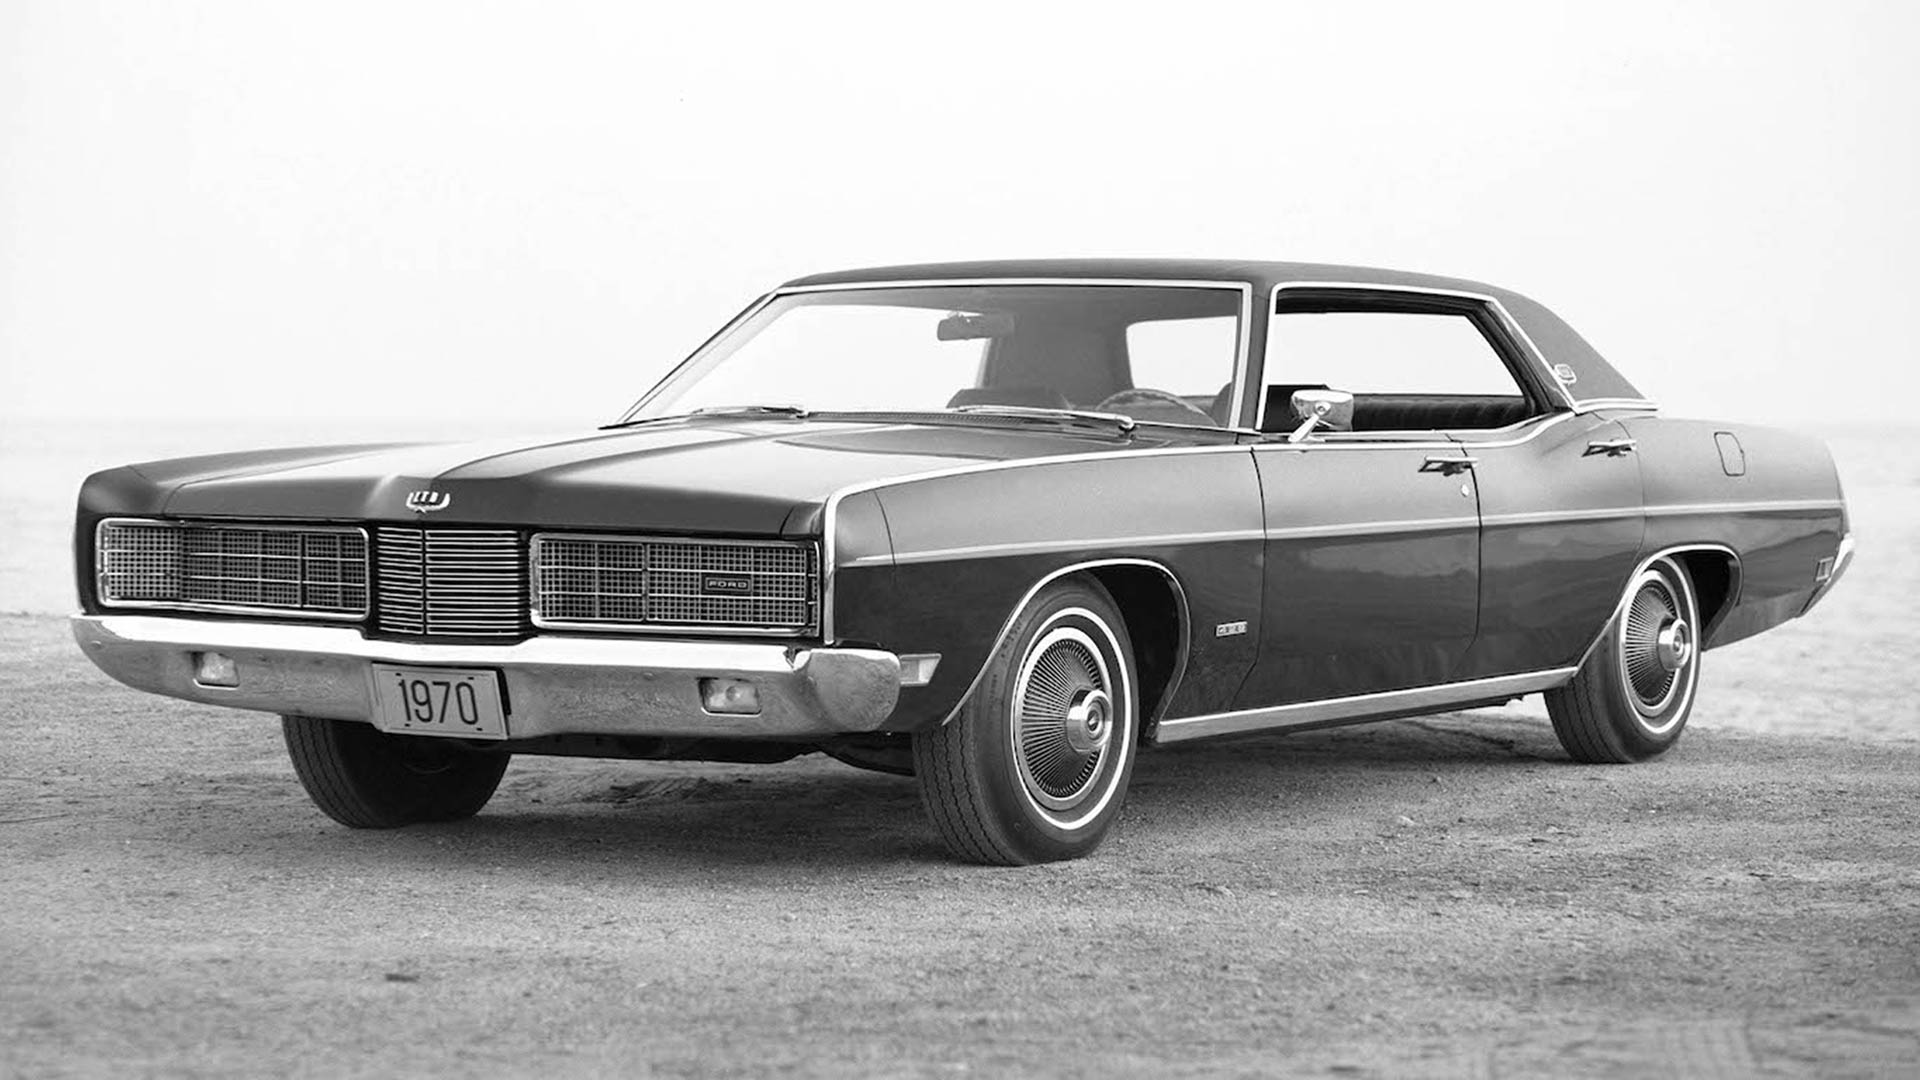 <p>Between 1969 and 1978, Ford sold 7.75 million examples of the second-generation LTD and its Mercury sisters. It was also the biggest car offered by the Blue Oval during its lifetime.</p> <p>Styling for the 1970 model year featured a grille inspired by the Thunderbird, combined with funky hidden headlights. Engine choices ranged from a big 4.9-liter (302-cubic inch) V8, through to a really big 7.0 (429-ci) V8.</p>